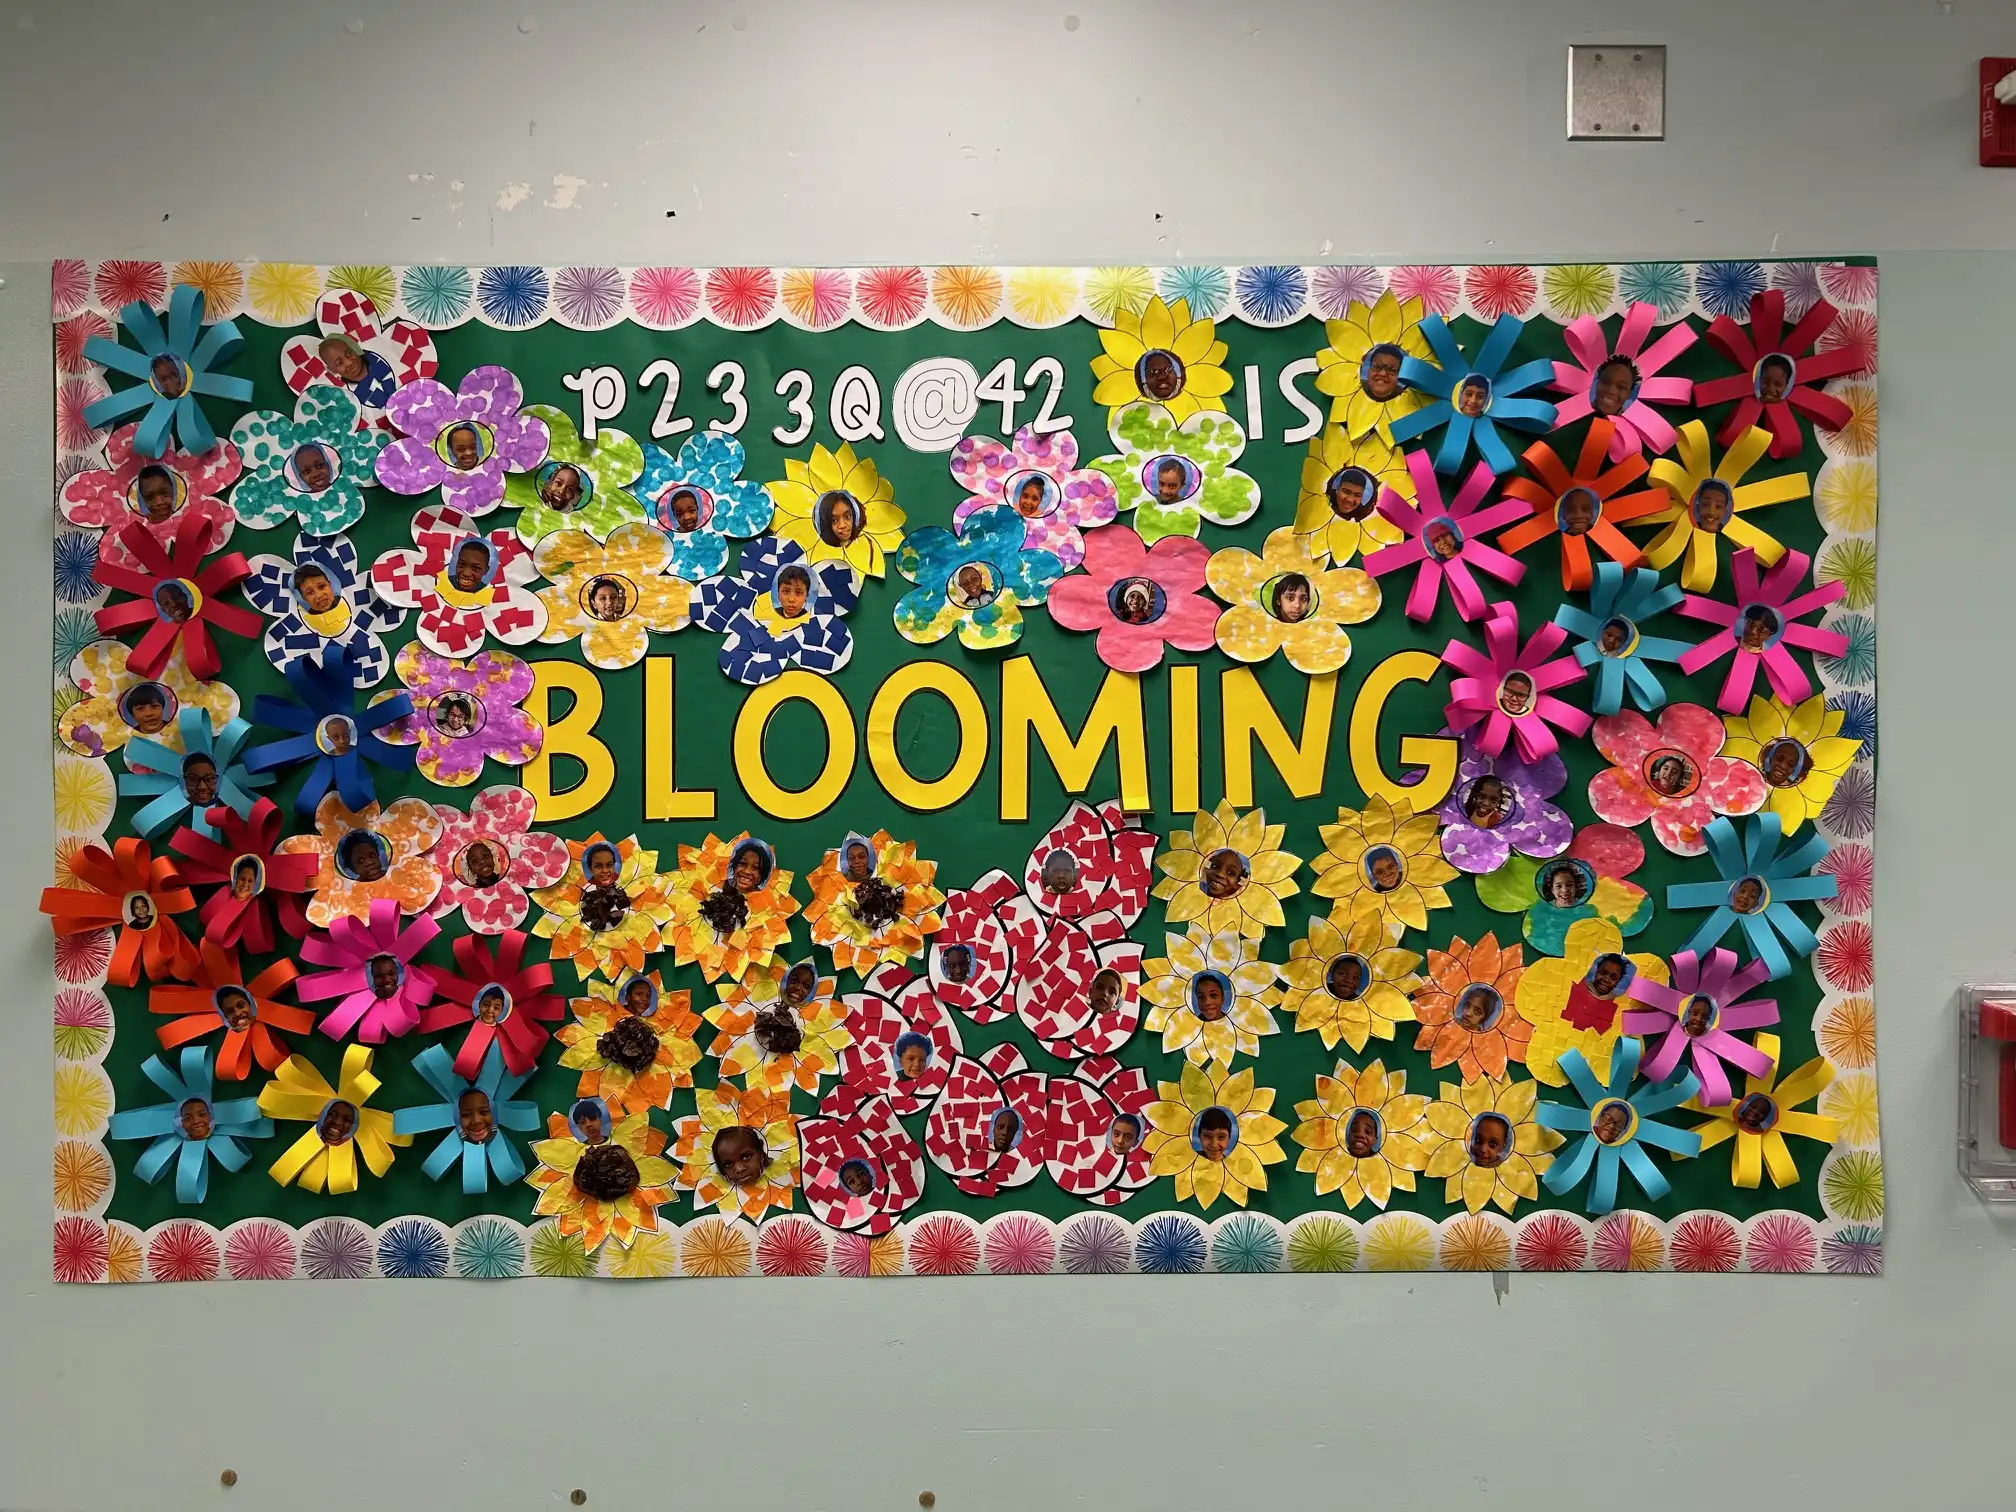 Bulletin board full of paper flowers of different colors